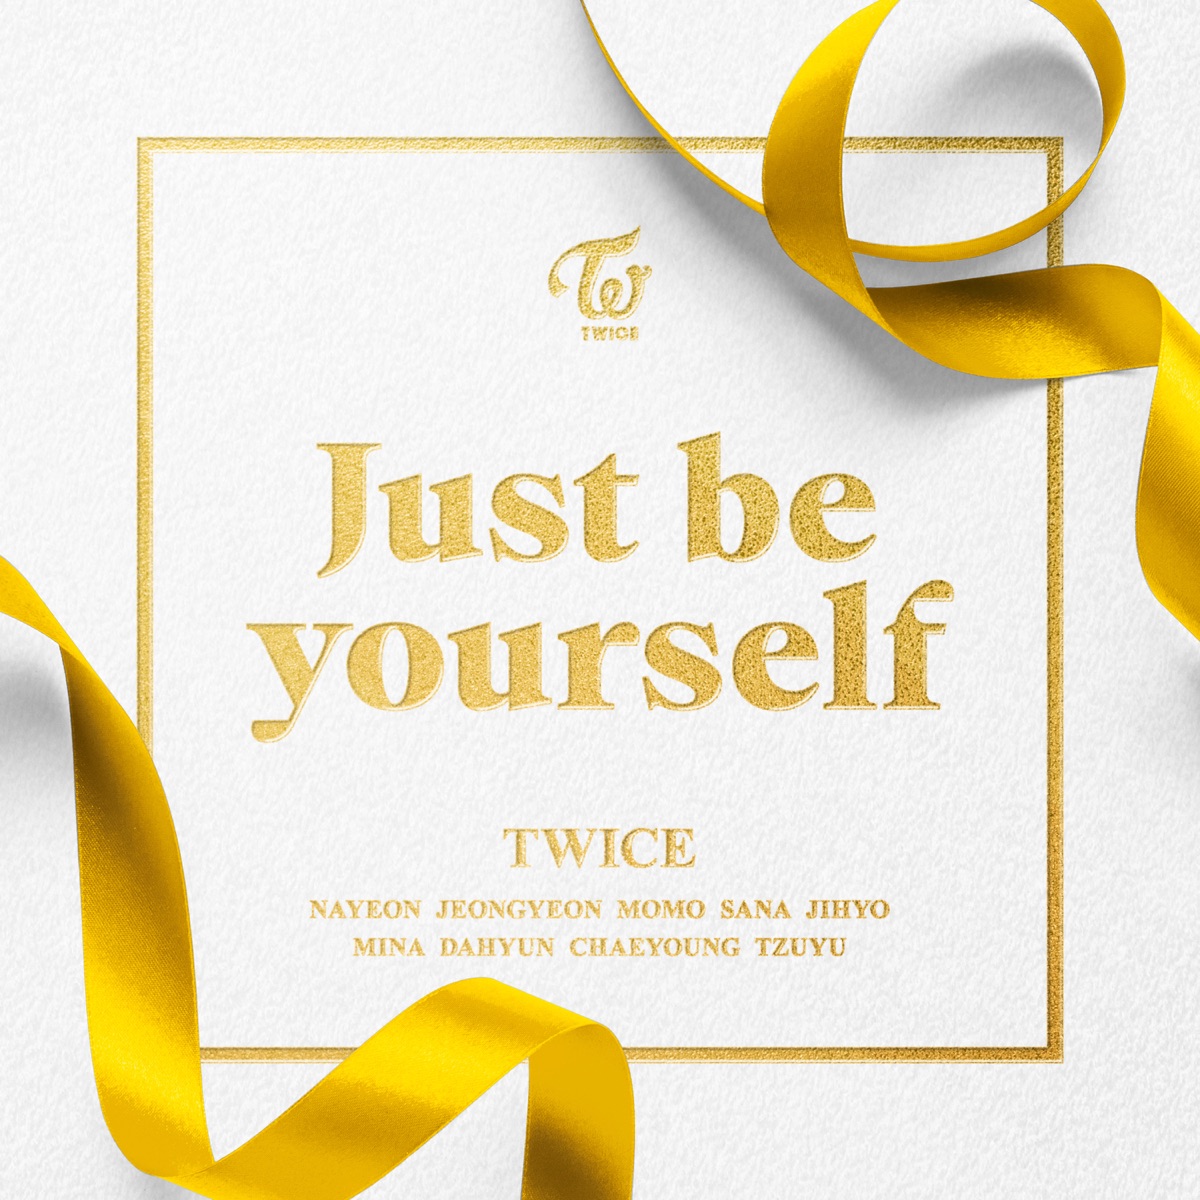 『TWICE - Just be yourself』収録の『Just be yourself』ジャケット